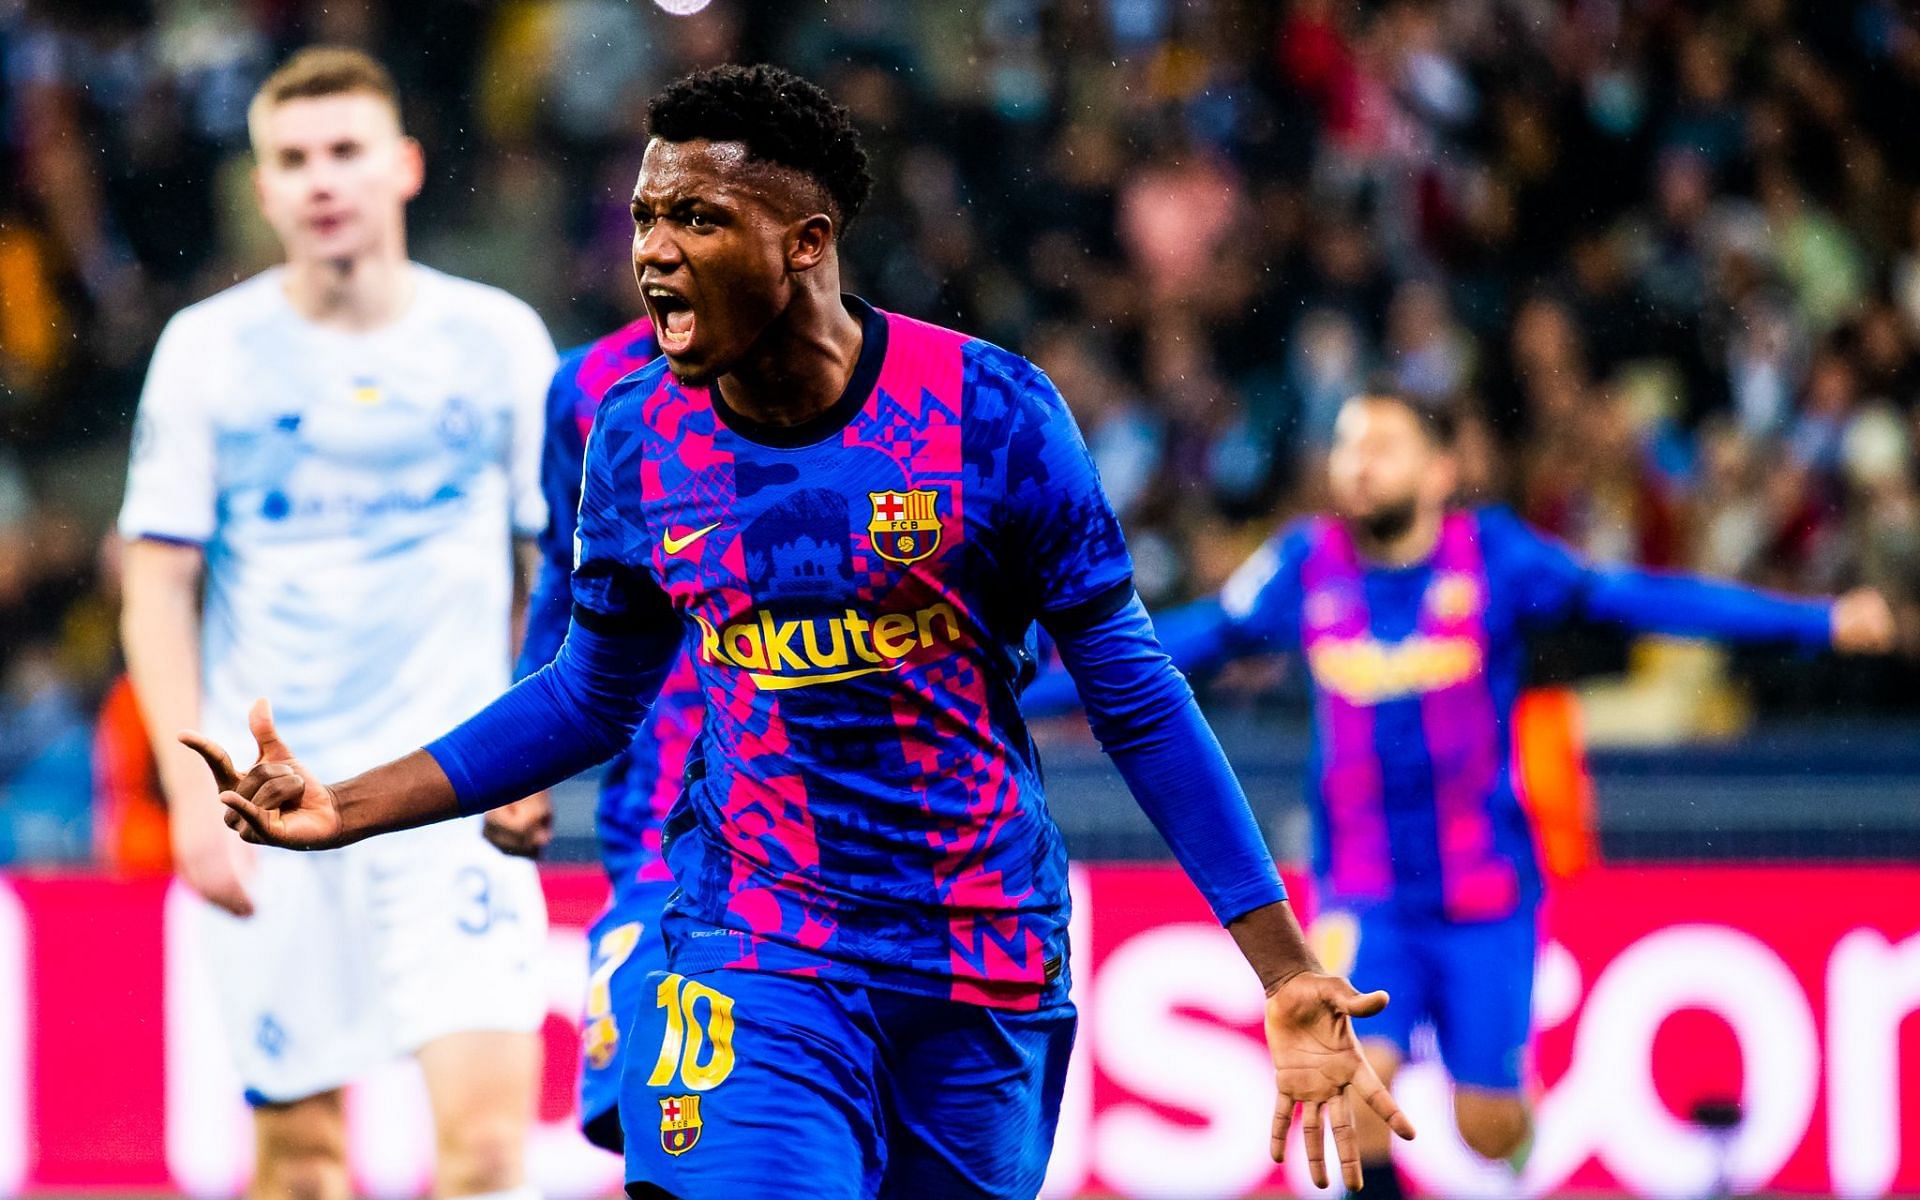 Ansu Fati scored the only goal as Barcelona beat Dynamo Kyiv in the Champions League.